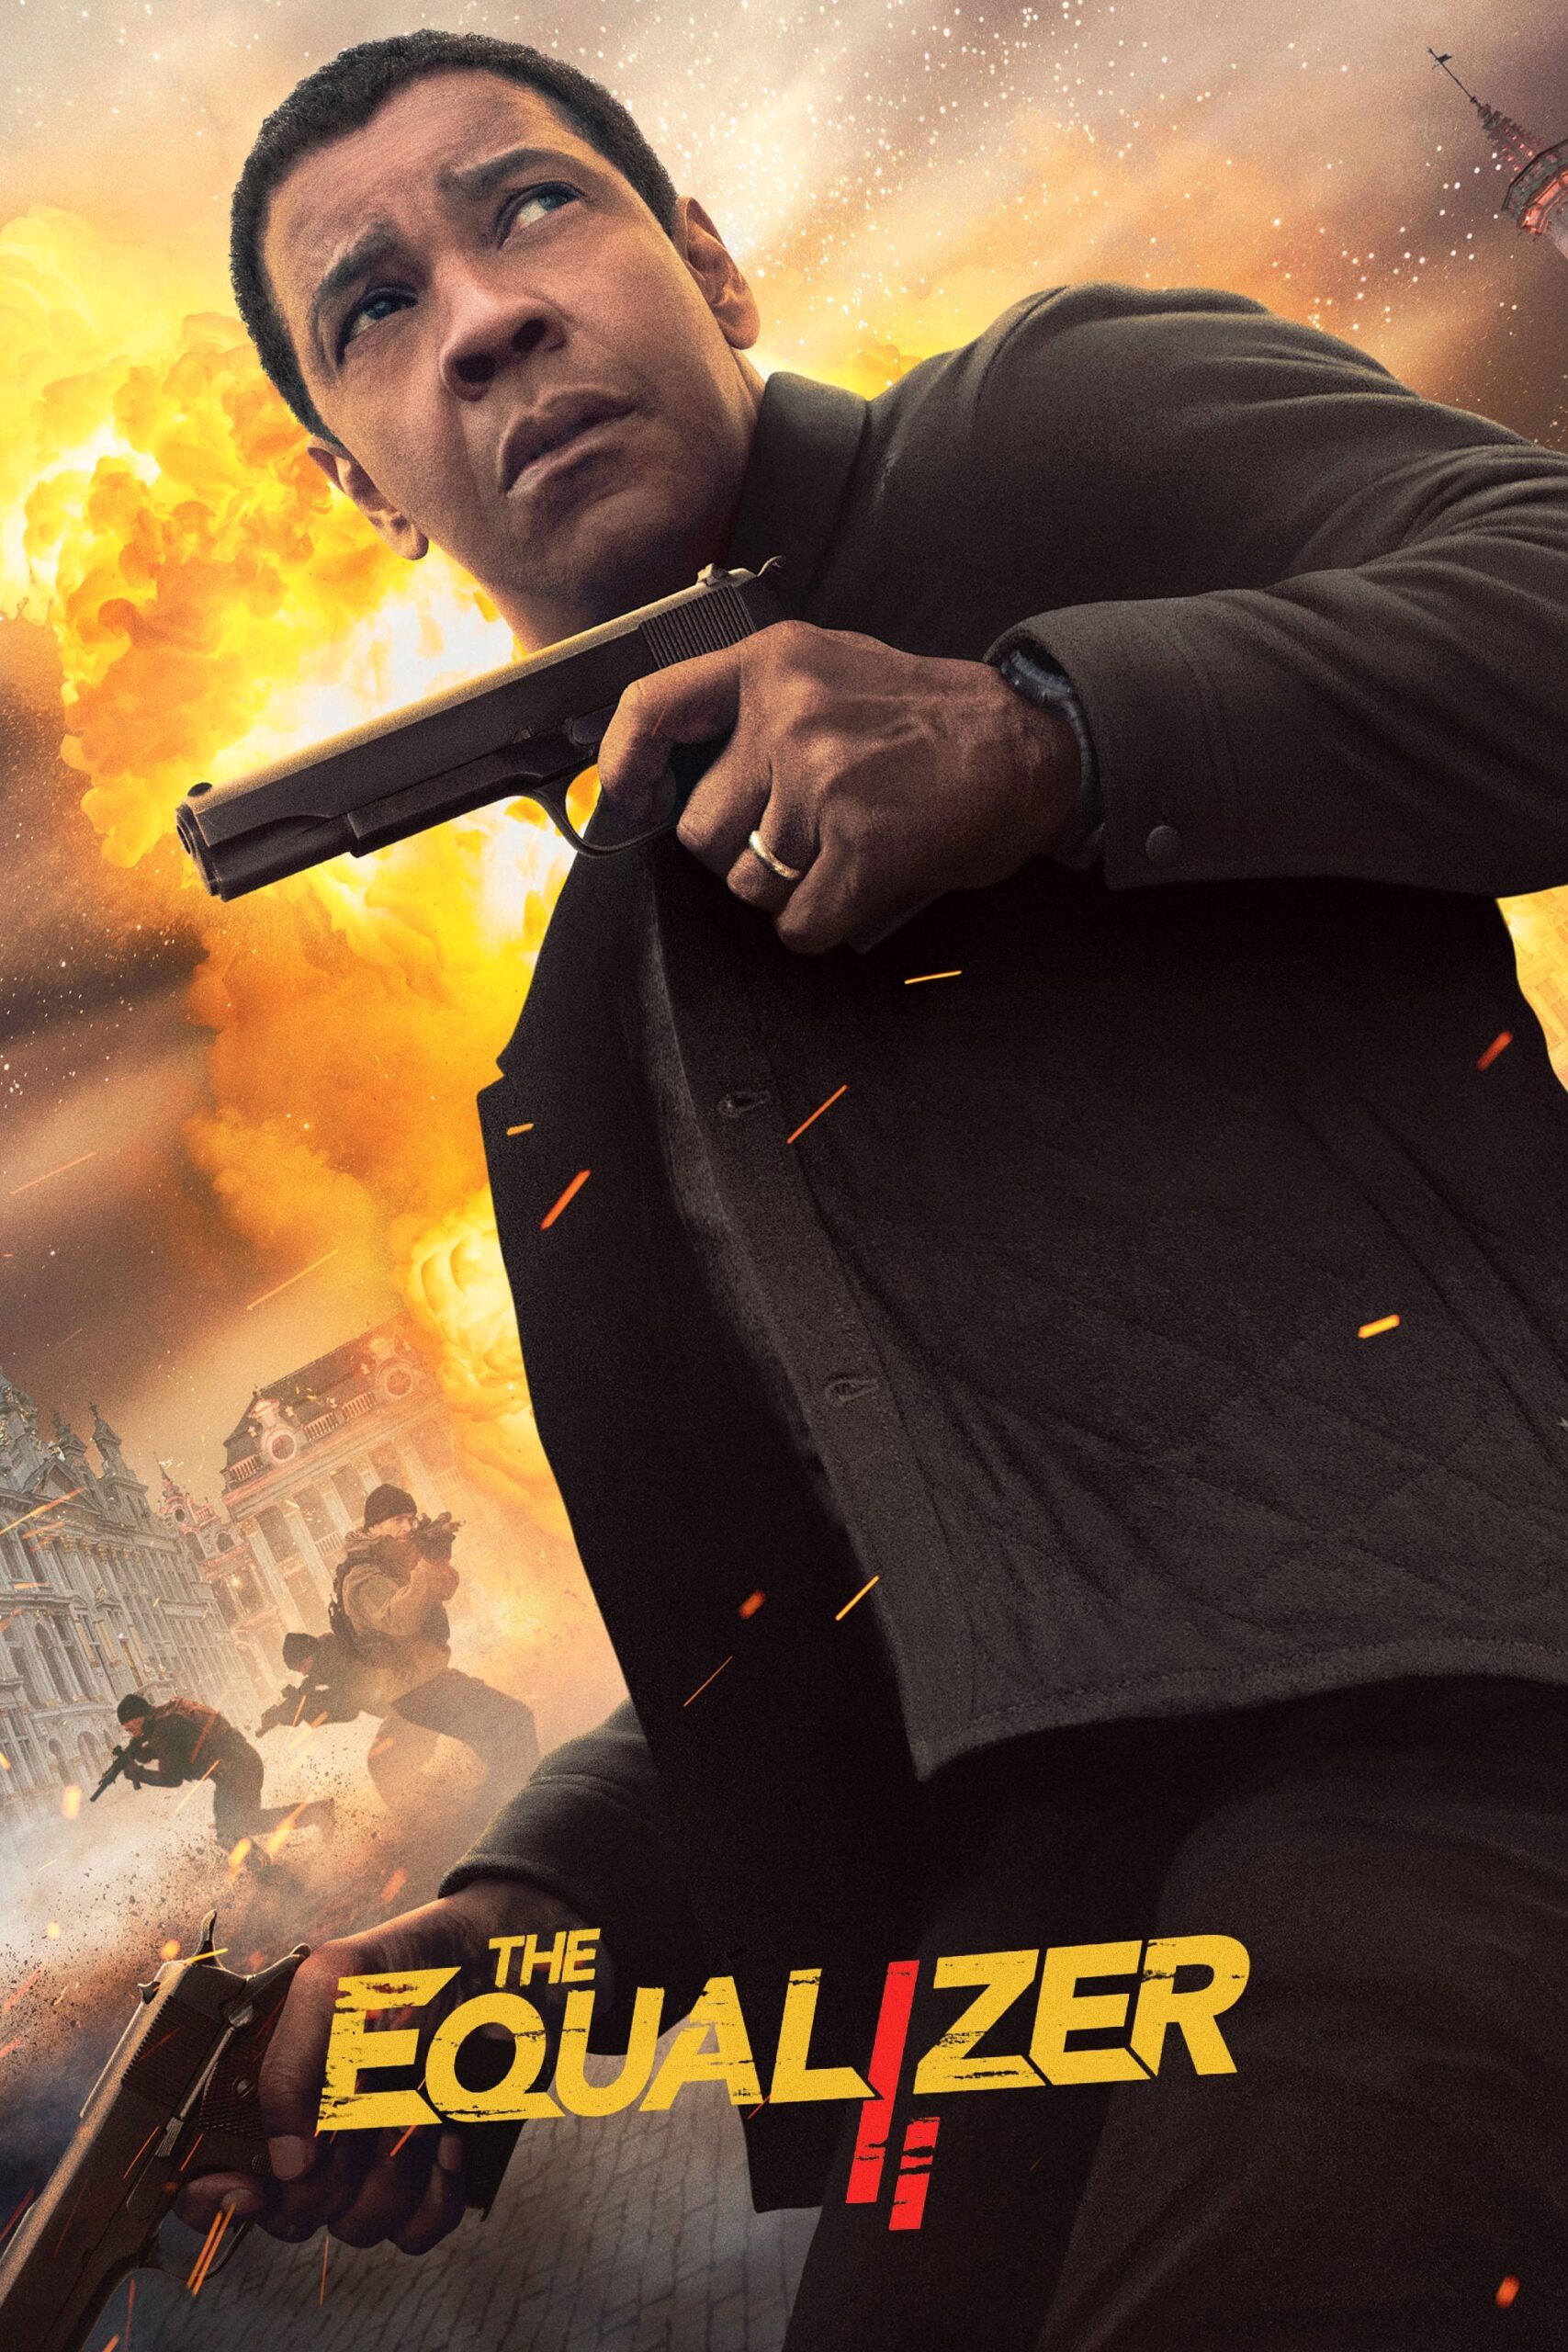 Poster for the movie "Equalizer 2"